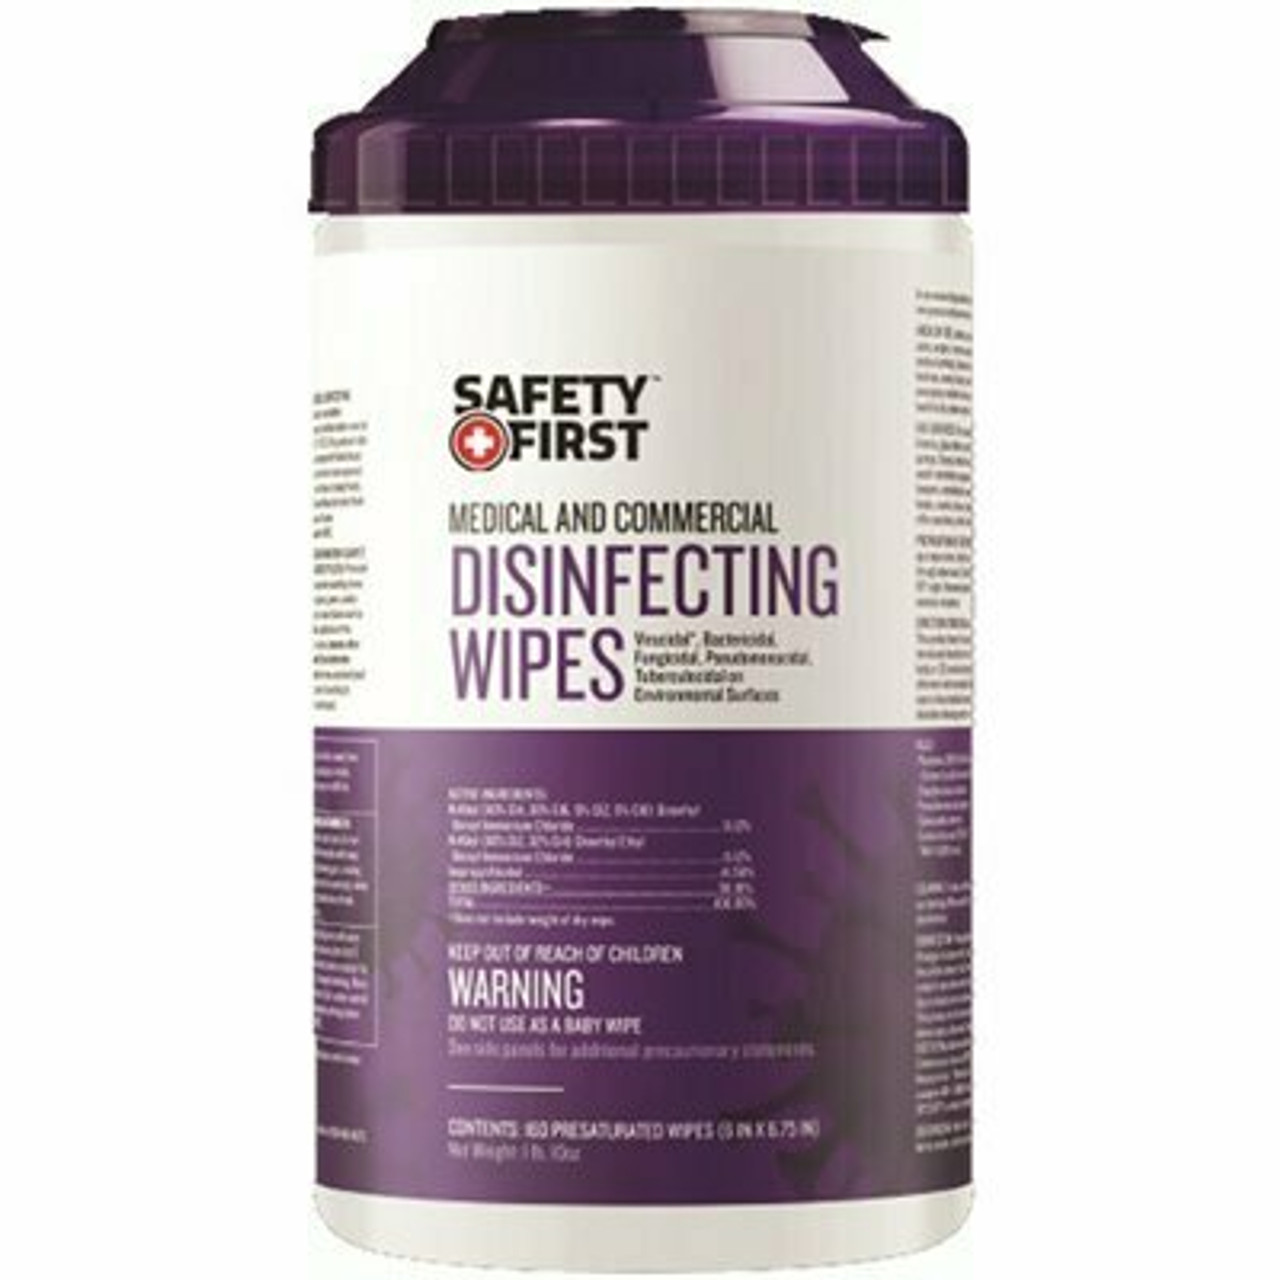 Safety First Medical And Commercial Disinfecting Wipes (80-Wipes)